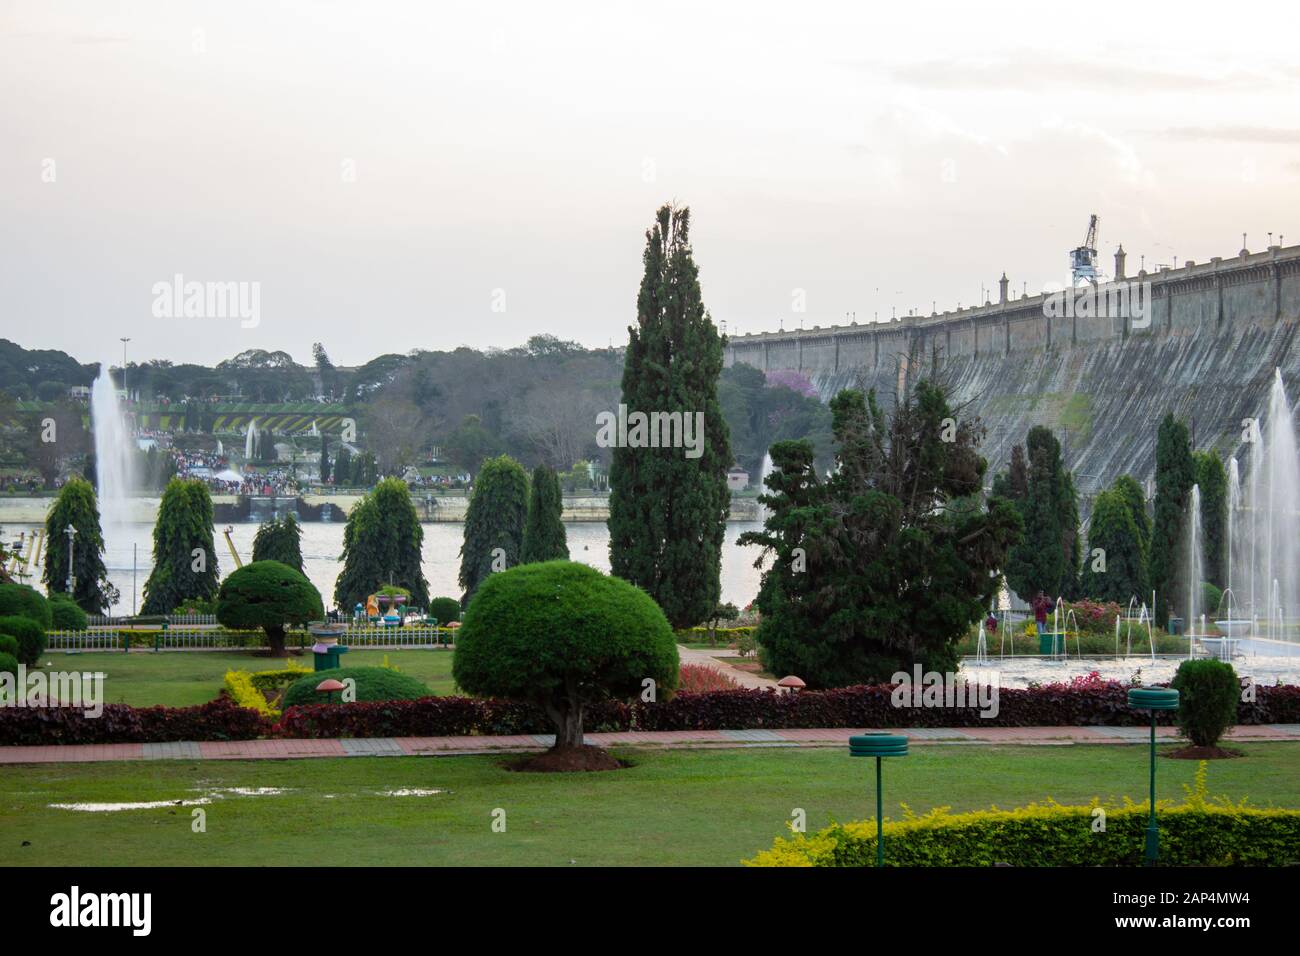 Mysore, Karnataka / India - January 01 2020: Beautiful landscaped garden with water fountains in Brindavan Gardens during sunset with KRS dam in backg Stock Photo